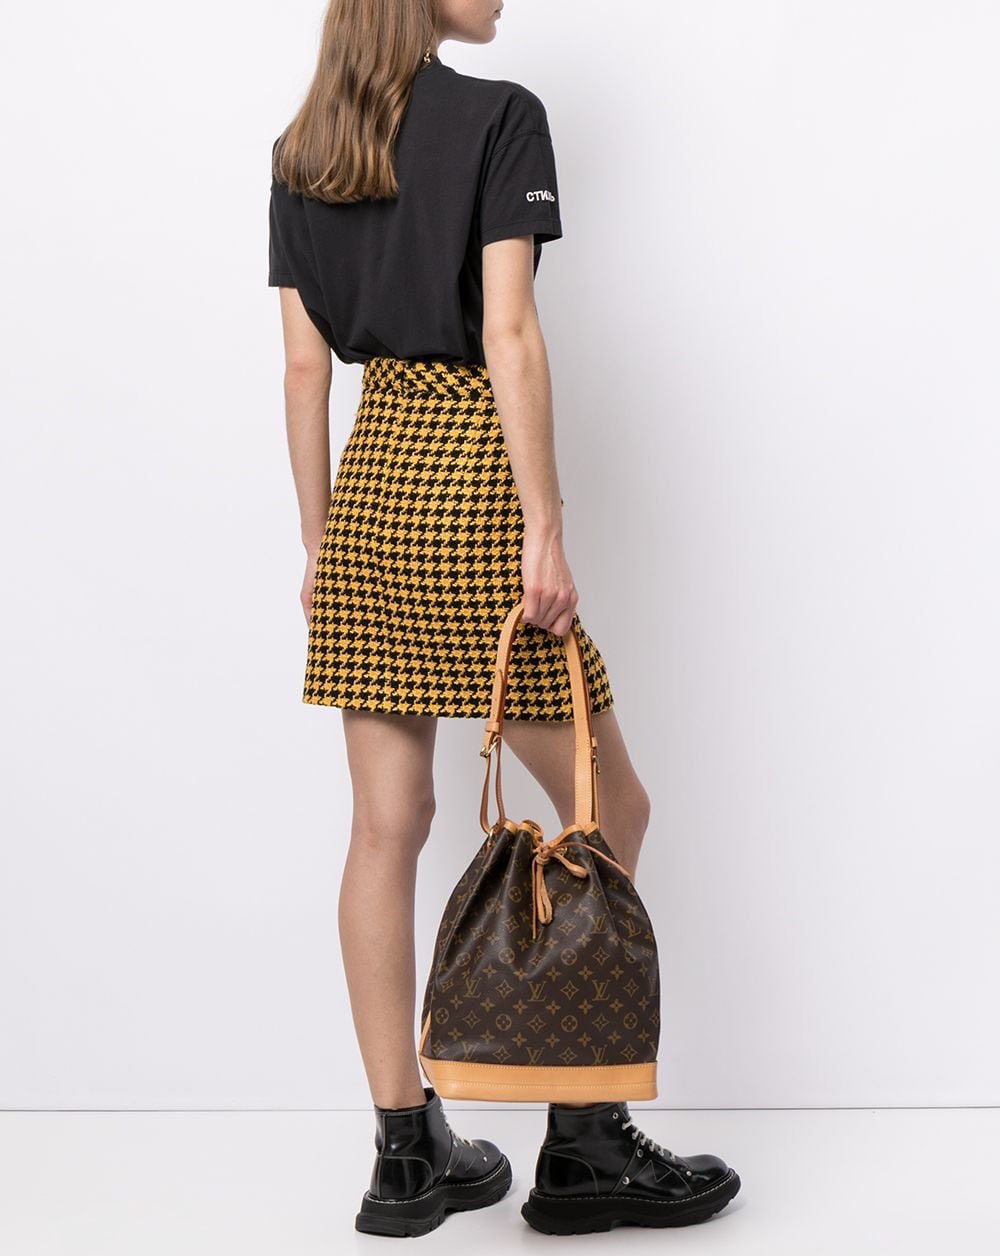 One of Louis Vuitton's oldest styles, the Noe is a classic bucket bag originally made to carry champagne bottles